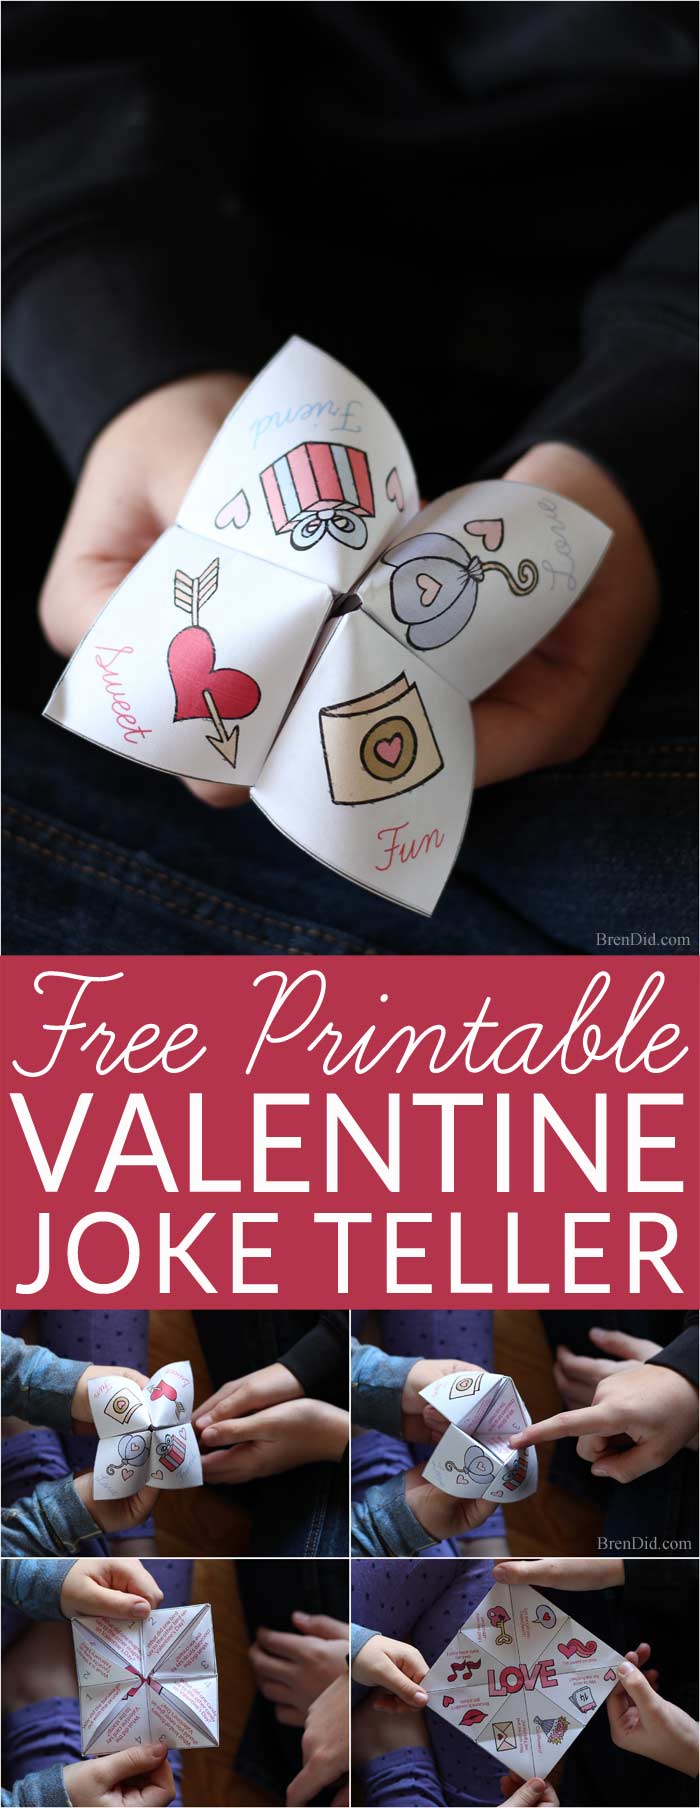 Humor and paper crafts combine in this hilariously fun fortune teller (cootie catcher) filled with silly Valentine jokes. Get your free printable Valentine Joke Teller for non-candy Valentines.